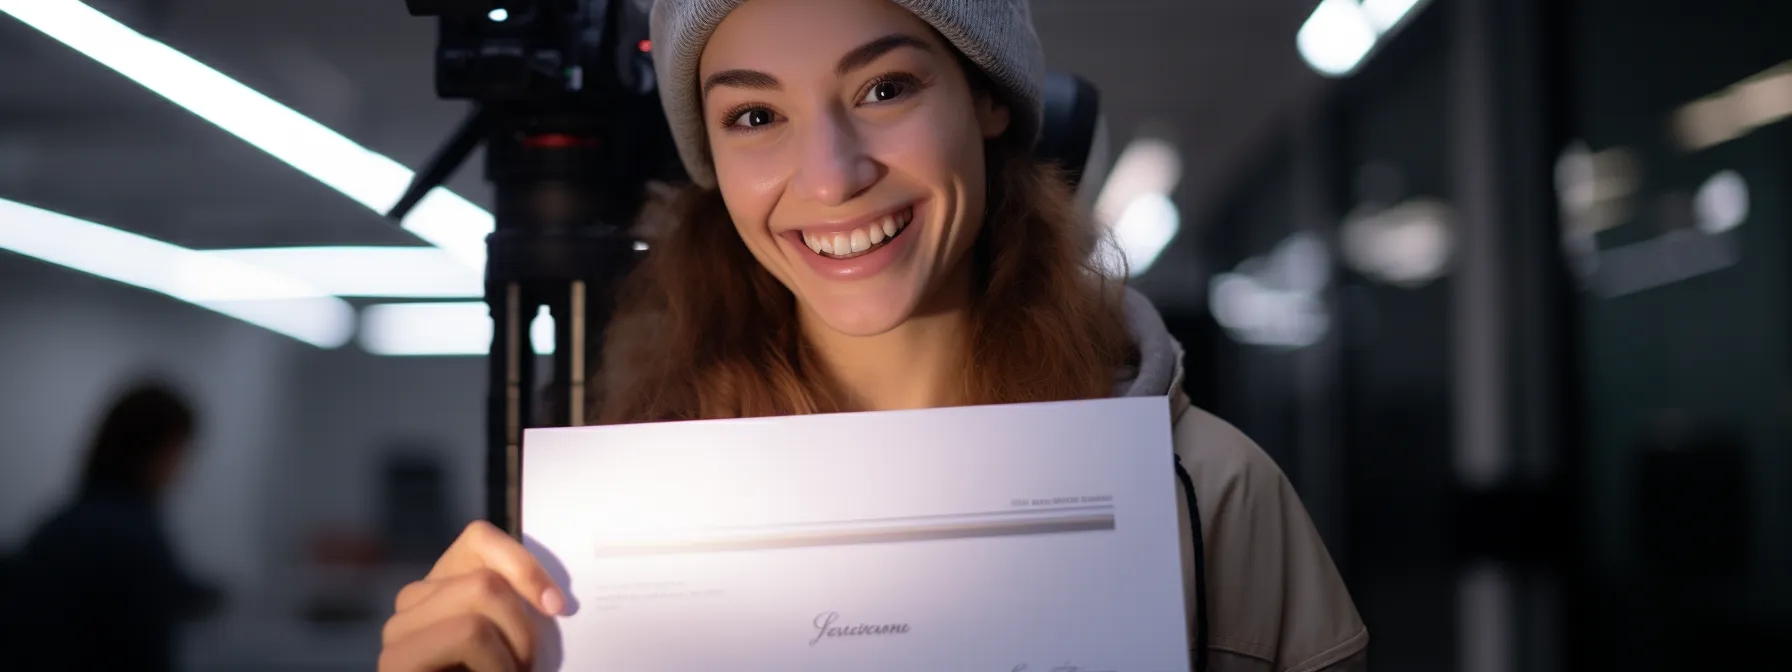 A Person Holding A Caohc Certification Document With A Satisfied Smile.